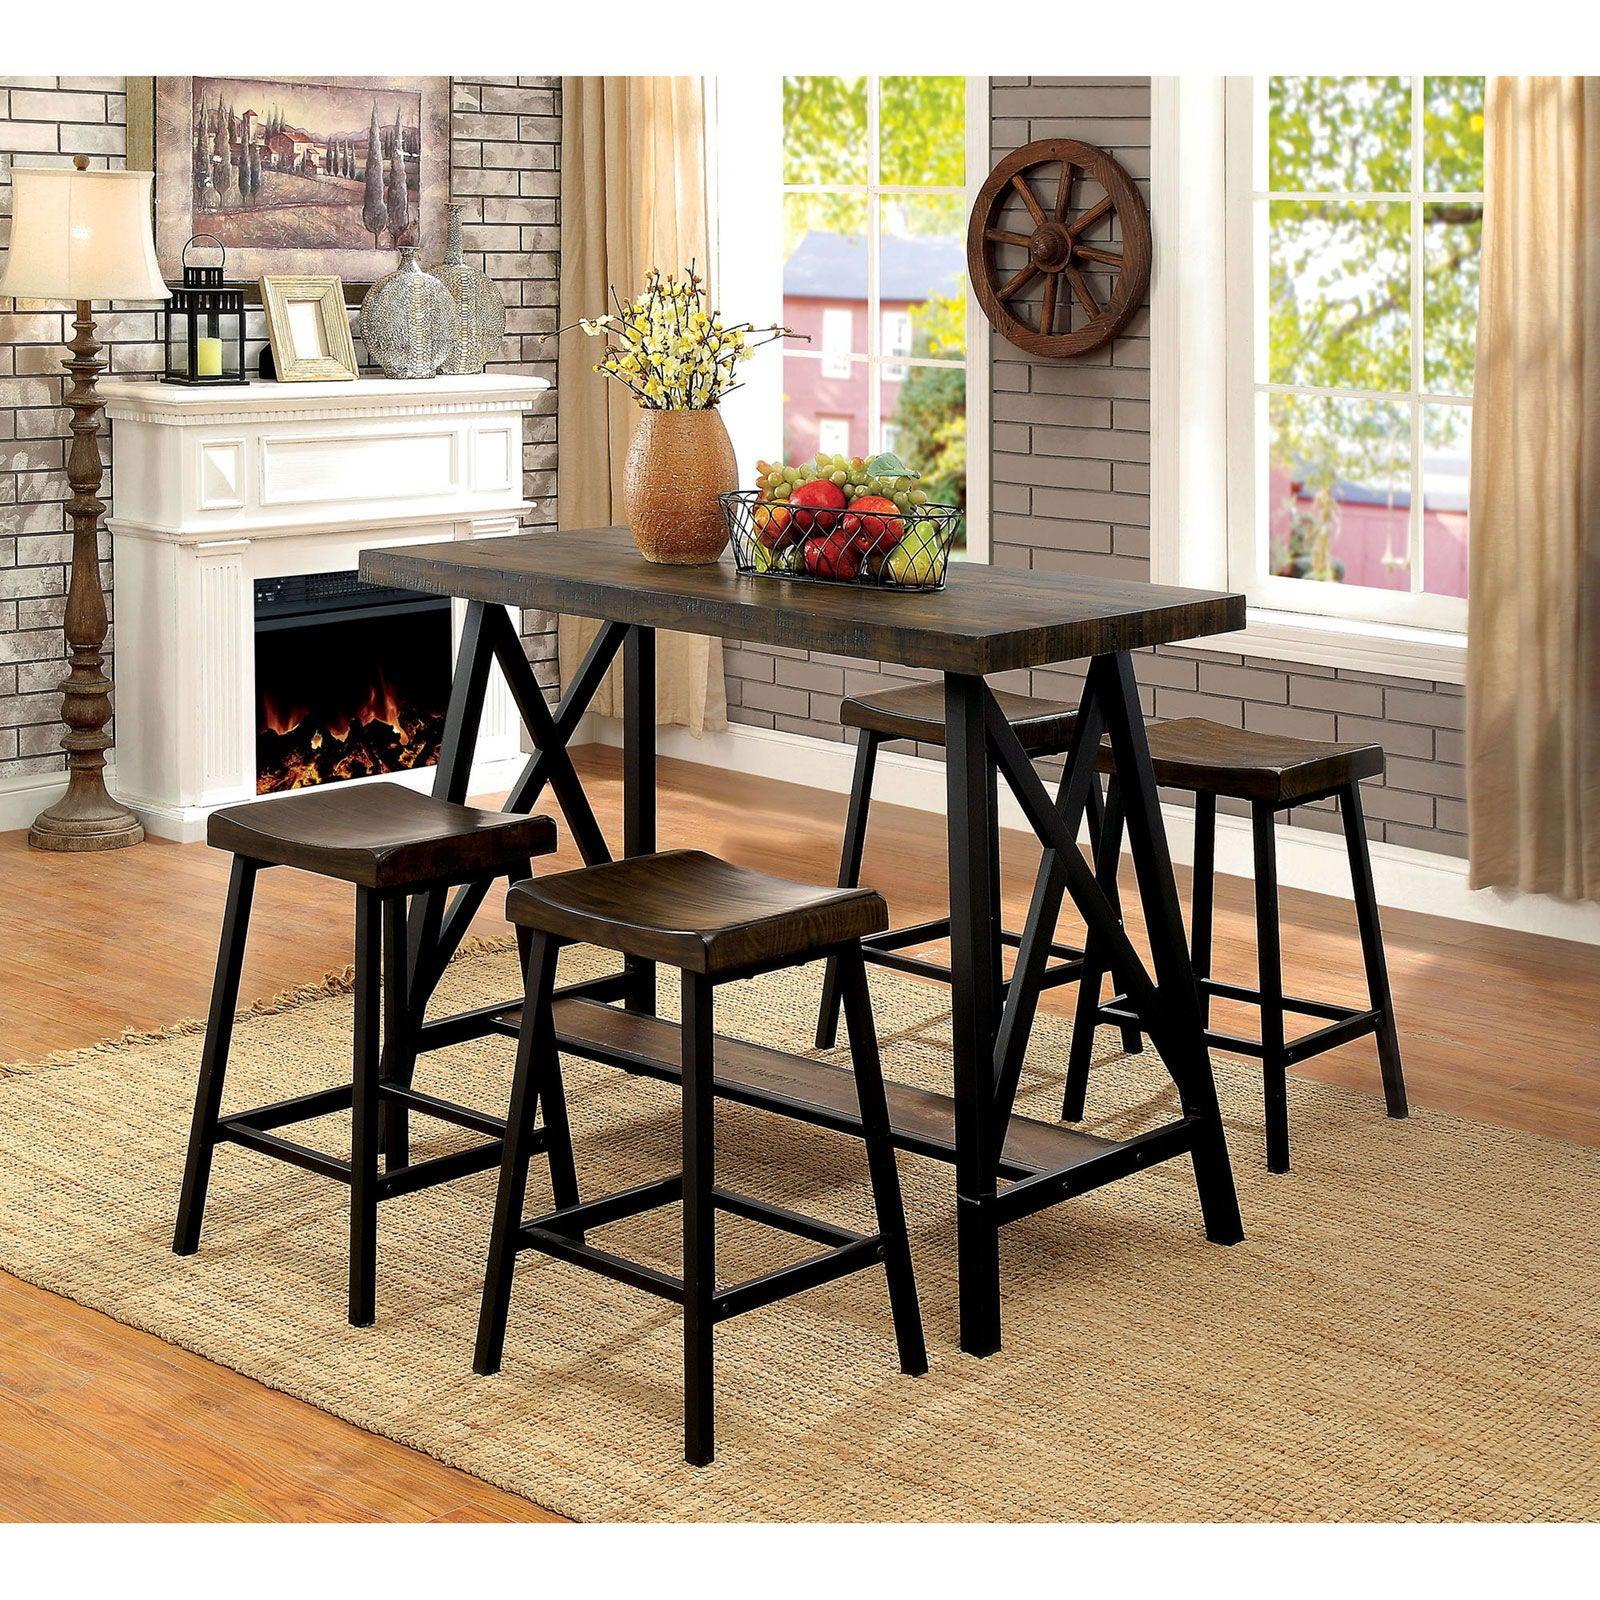 Furniture of America - Lainey - Counter Height Table - Medium Weathered Oak / Black - 5th Avenue Furniture